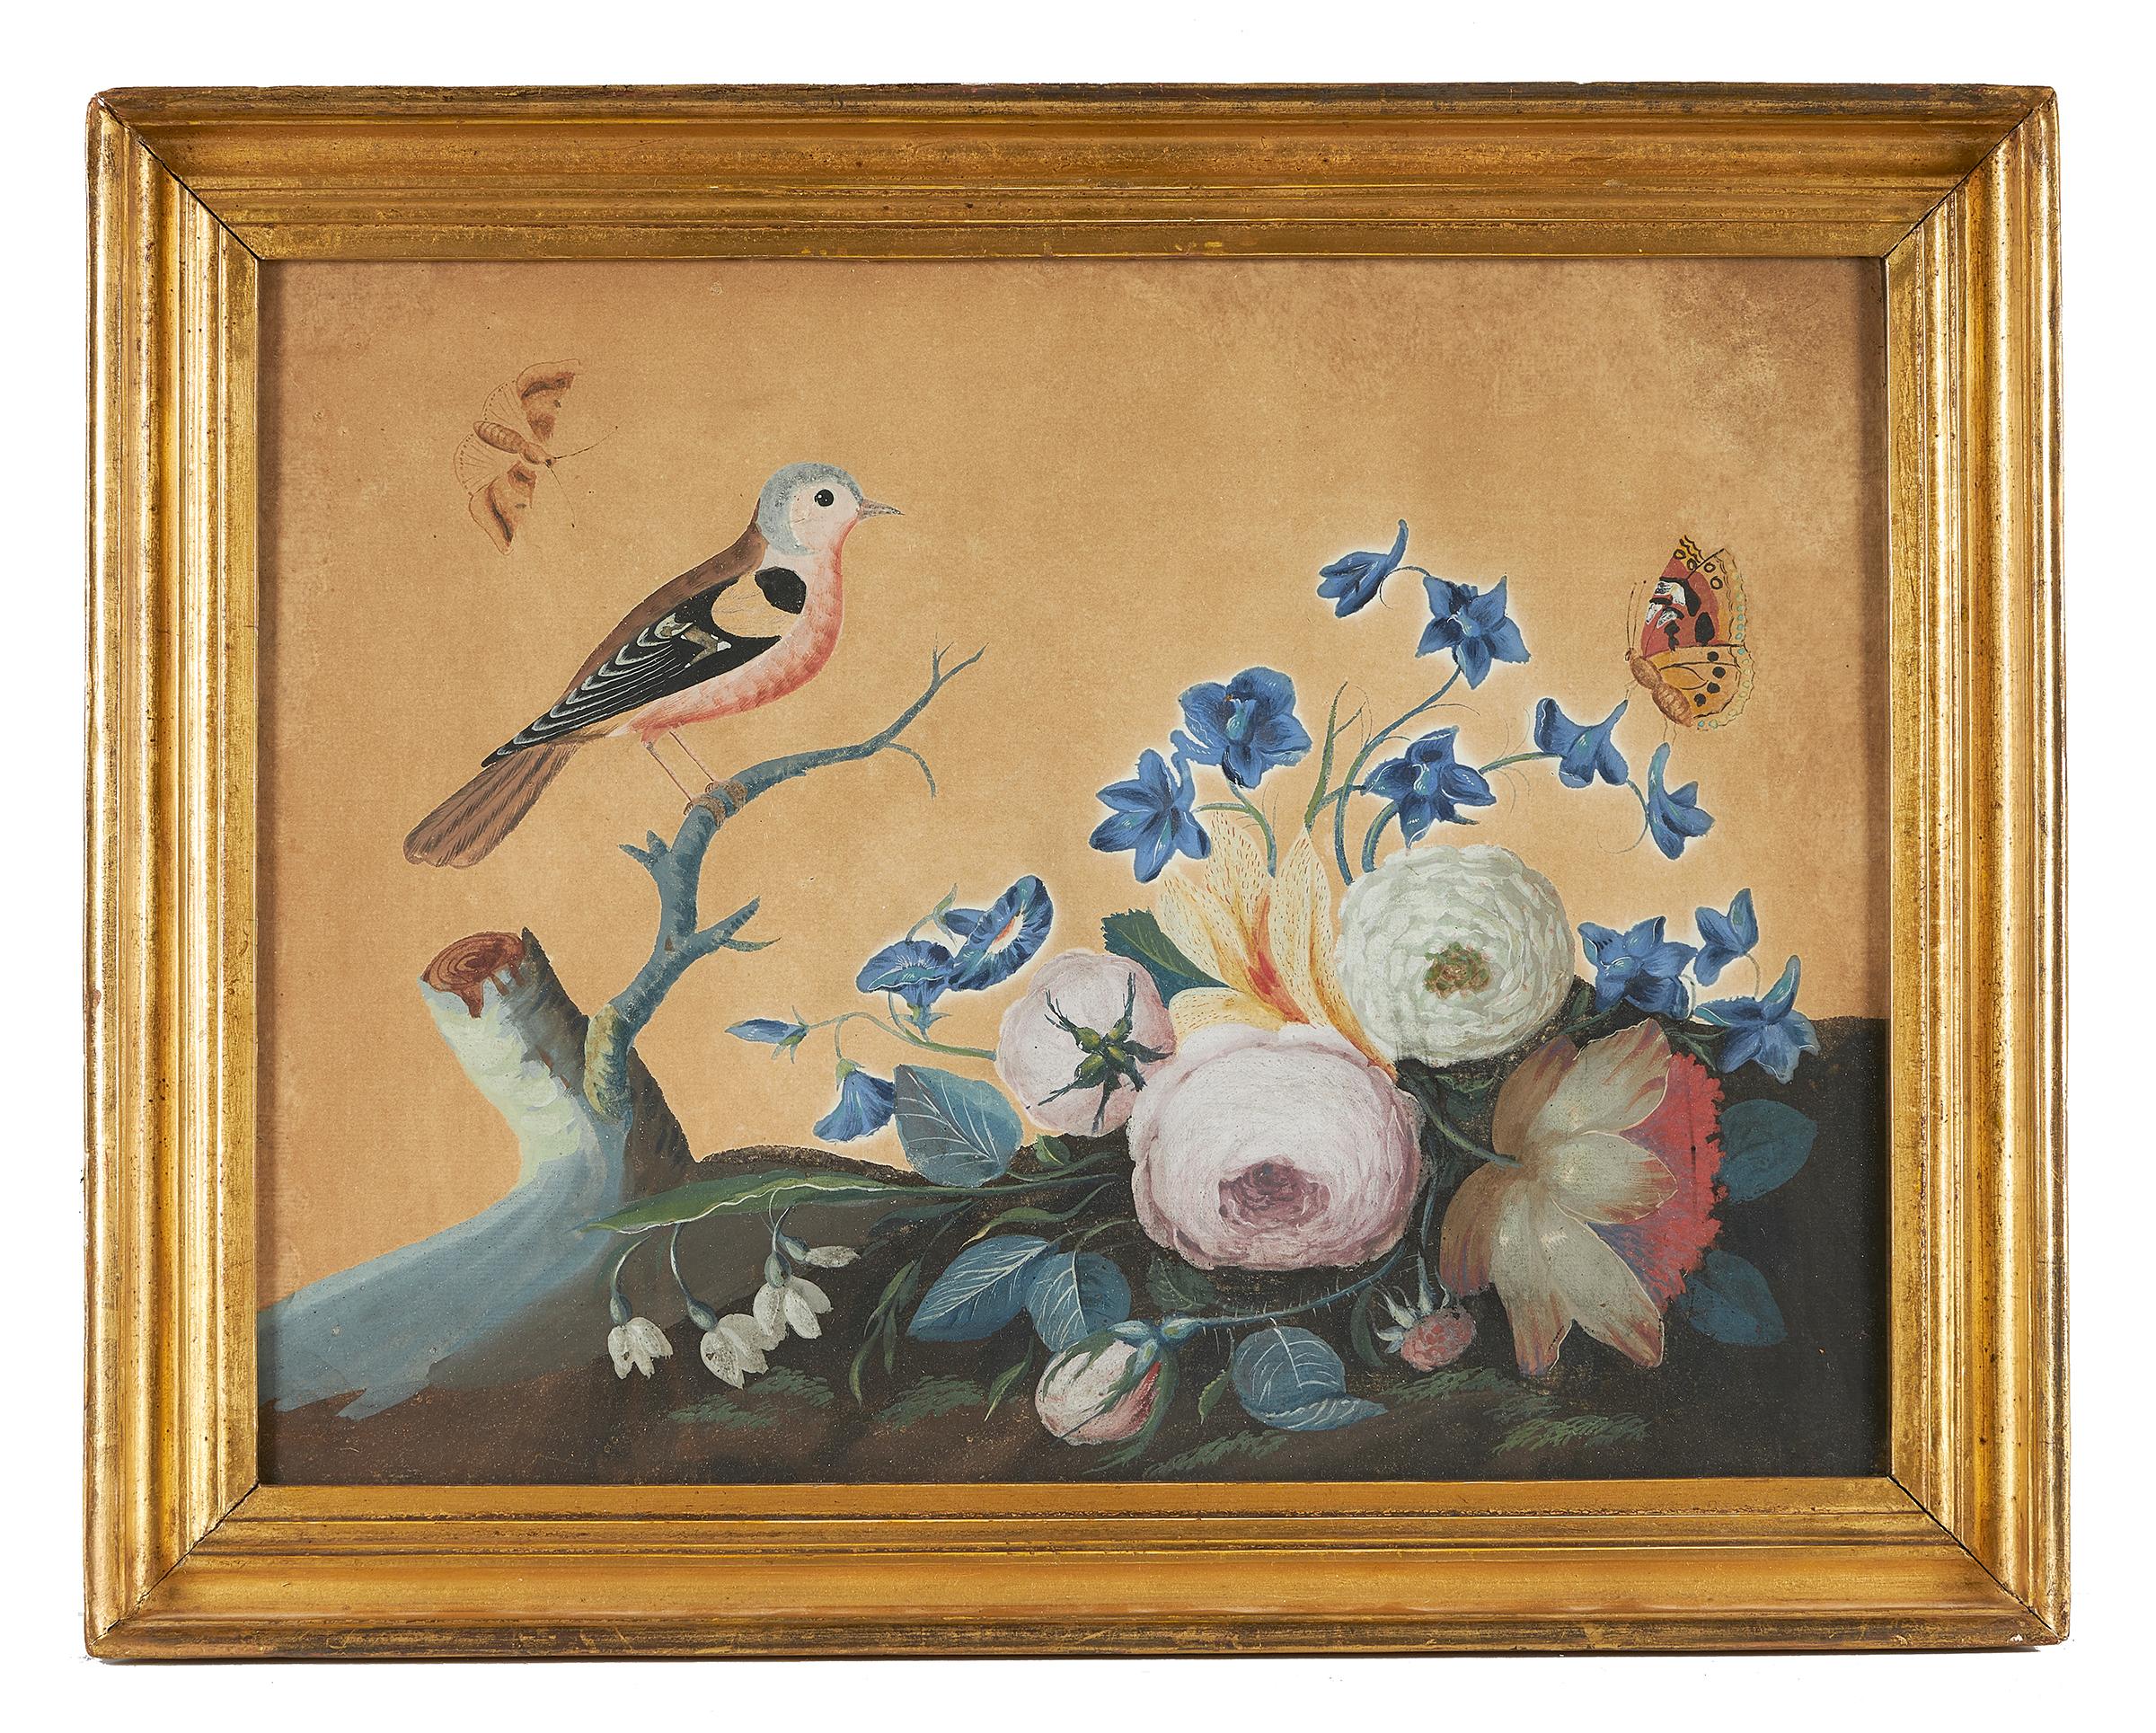 Samuel Dixon (Irish, 1669-1769), circa 1775, 'A Chaffinch with a Group of Glowers', from the basso relievo set 'Foreign and Domestick Birds', a tergo with fragmented label with dedication to 'the Countess of Meath', gouache on embossed paper, framed.